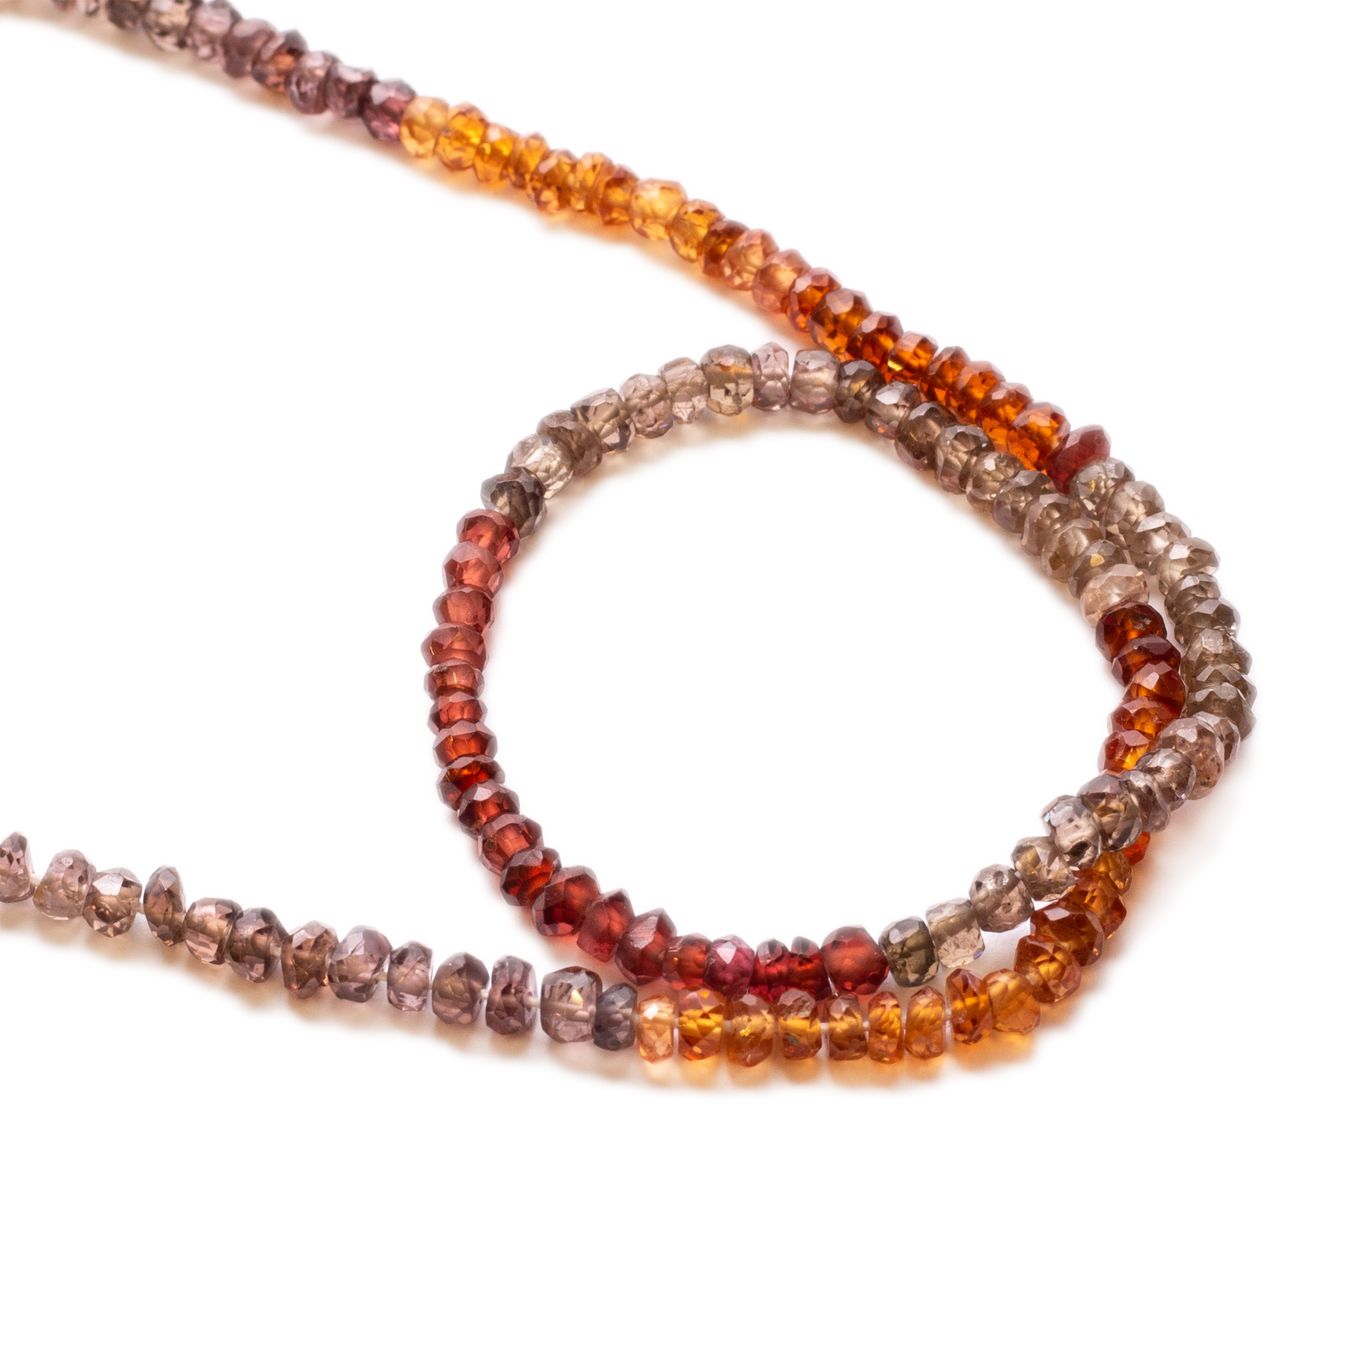 Turundu 'Sapphire' Faceted Rondelle Beads - Approx 3x2.5mm 